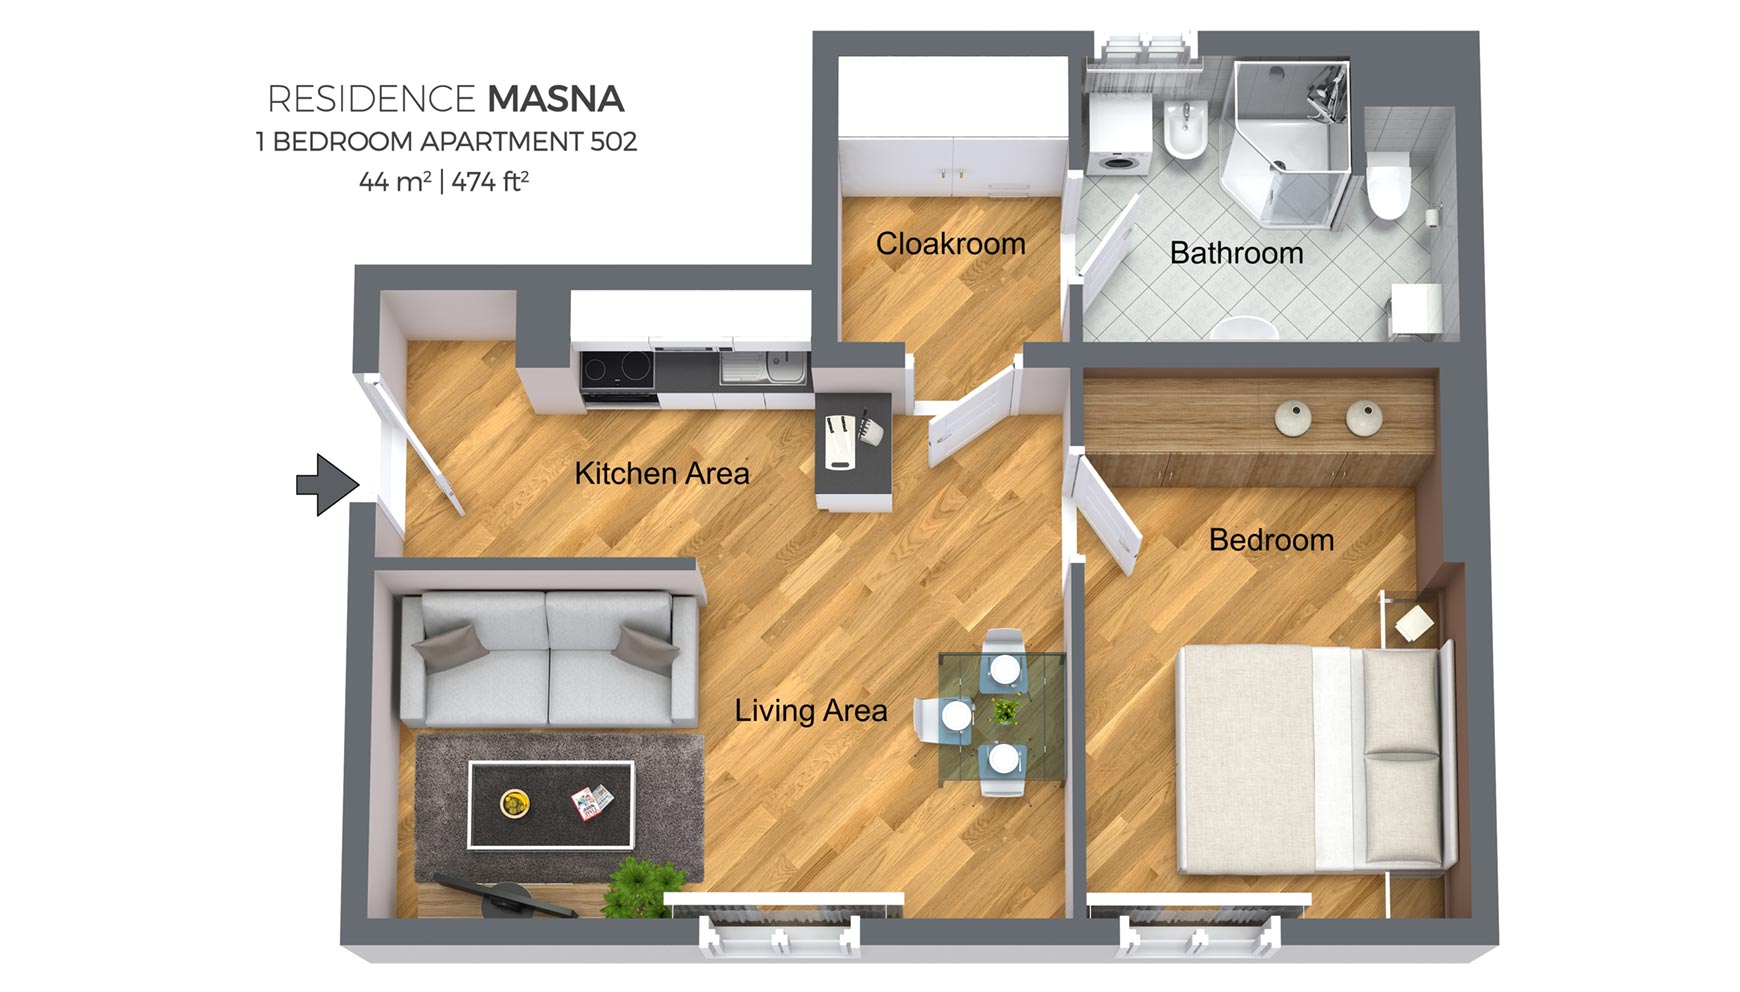 Floorplan of a one bedroom apartment type 4 in Residence Masna